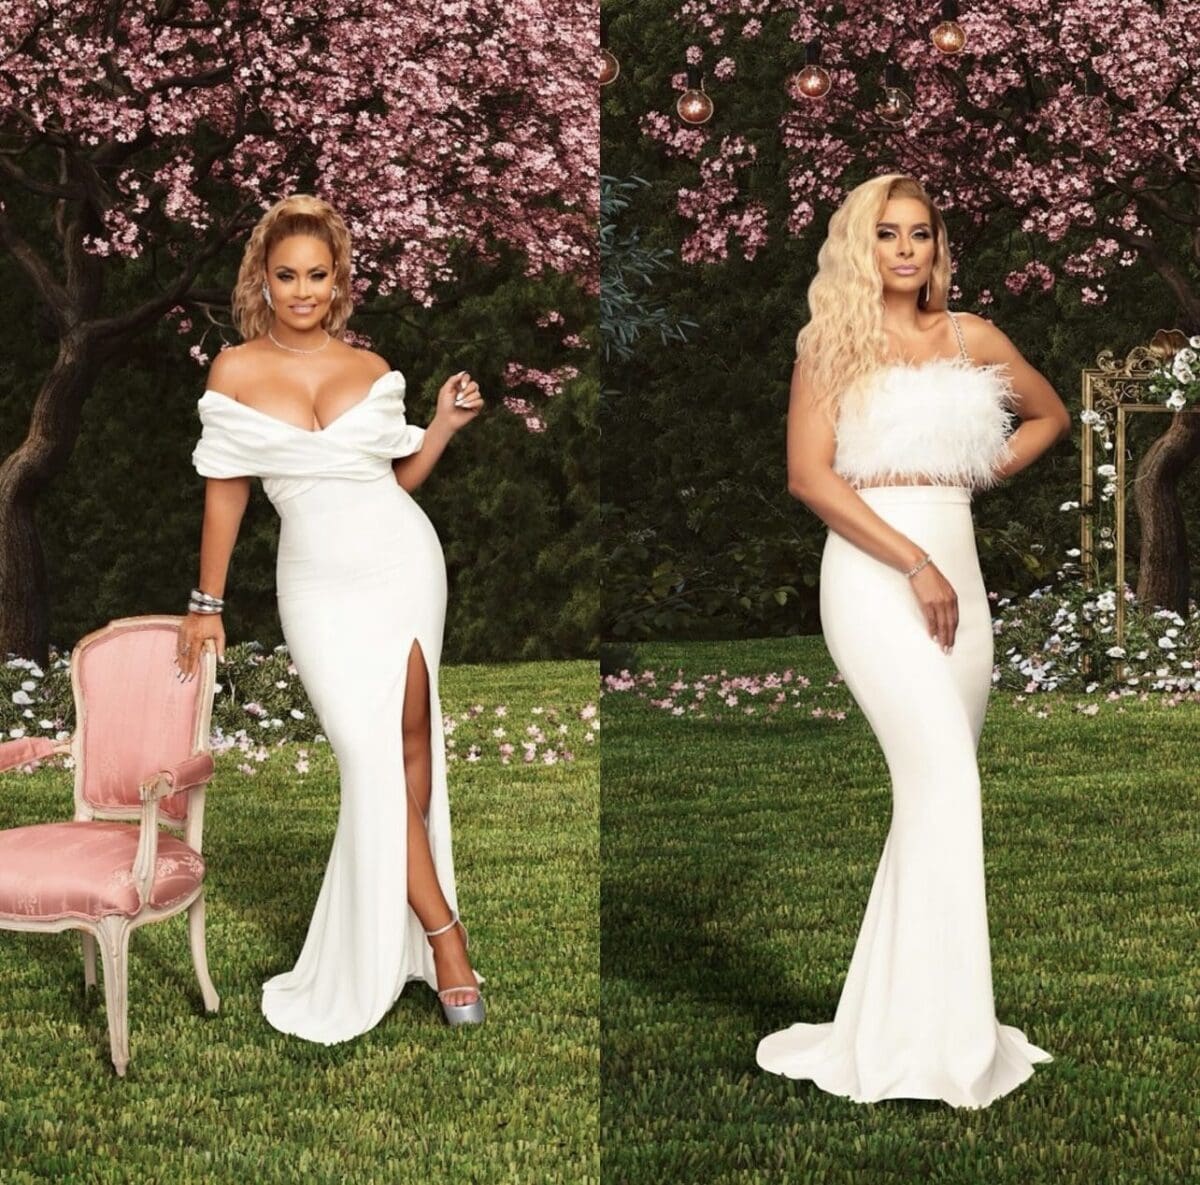 The Green-Eyed Bandits, Gizelle Bryant and Robyn Dixon, are back for season 8 of the Real Housewives of Potomac